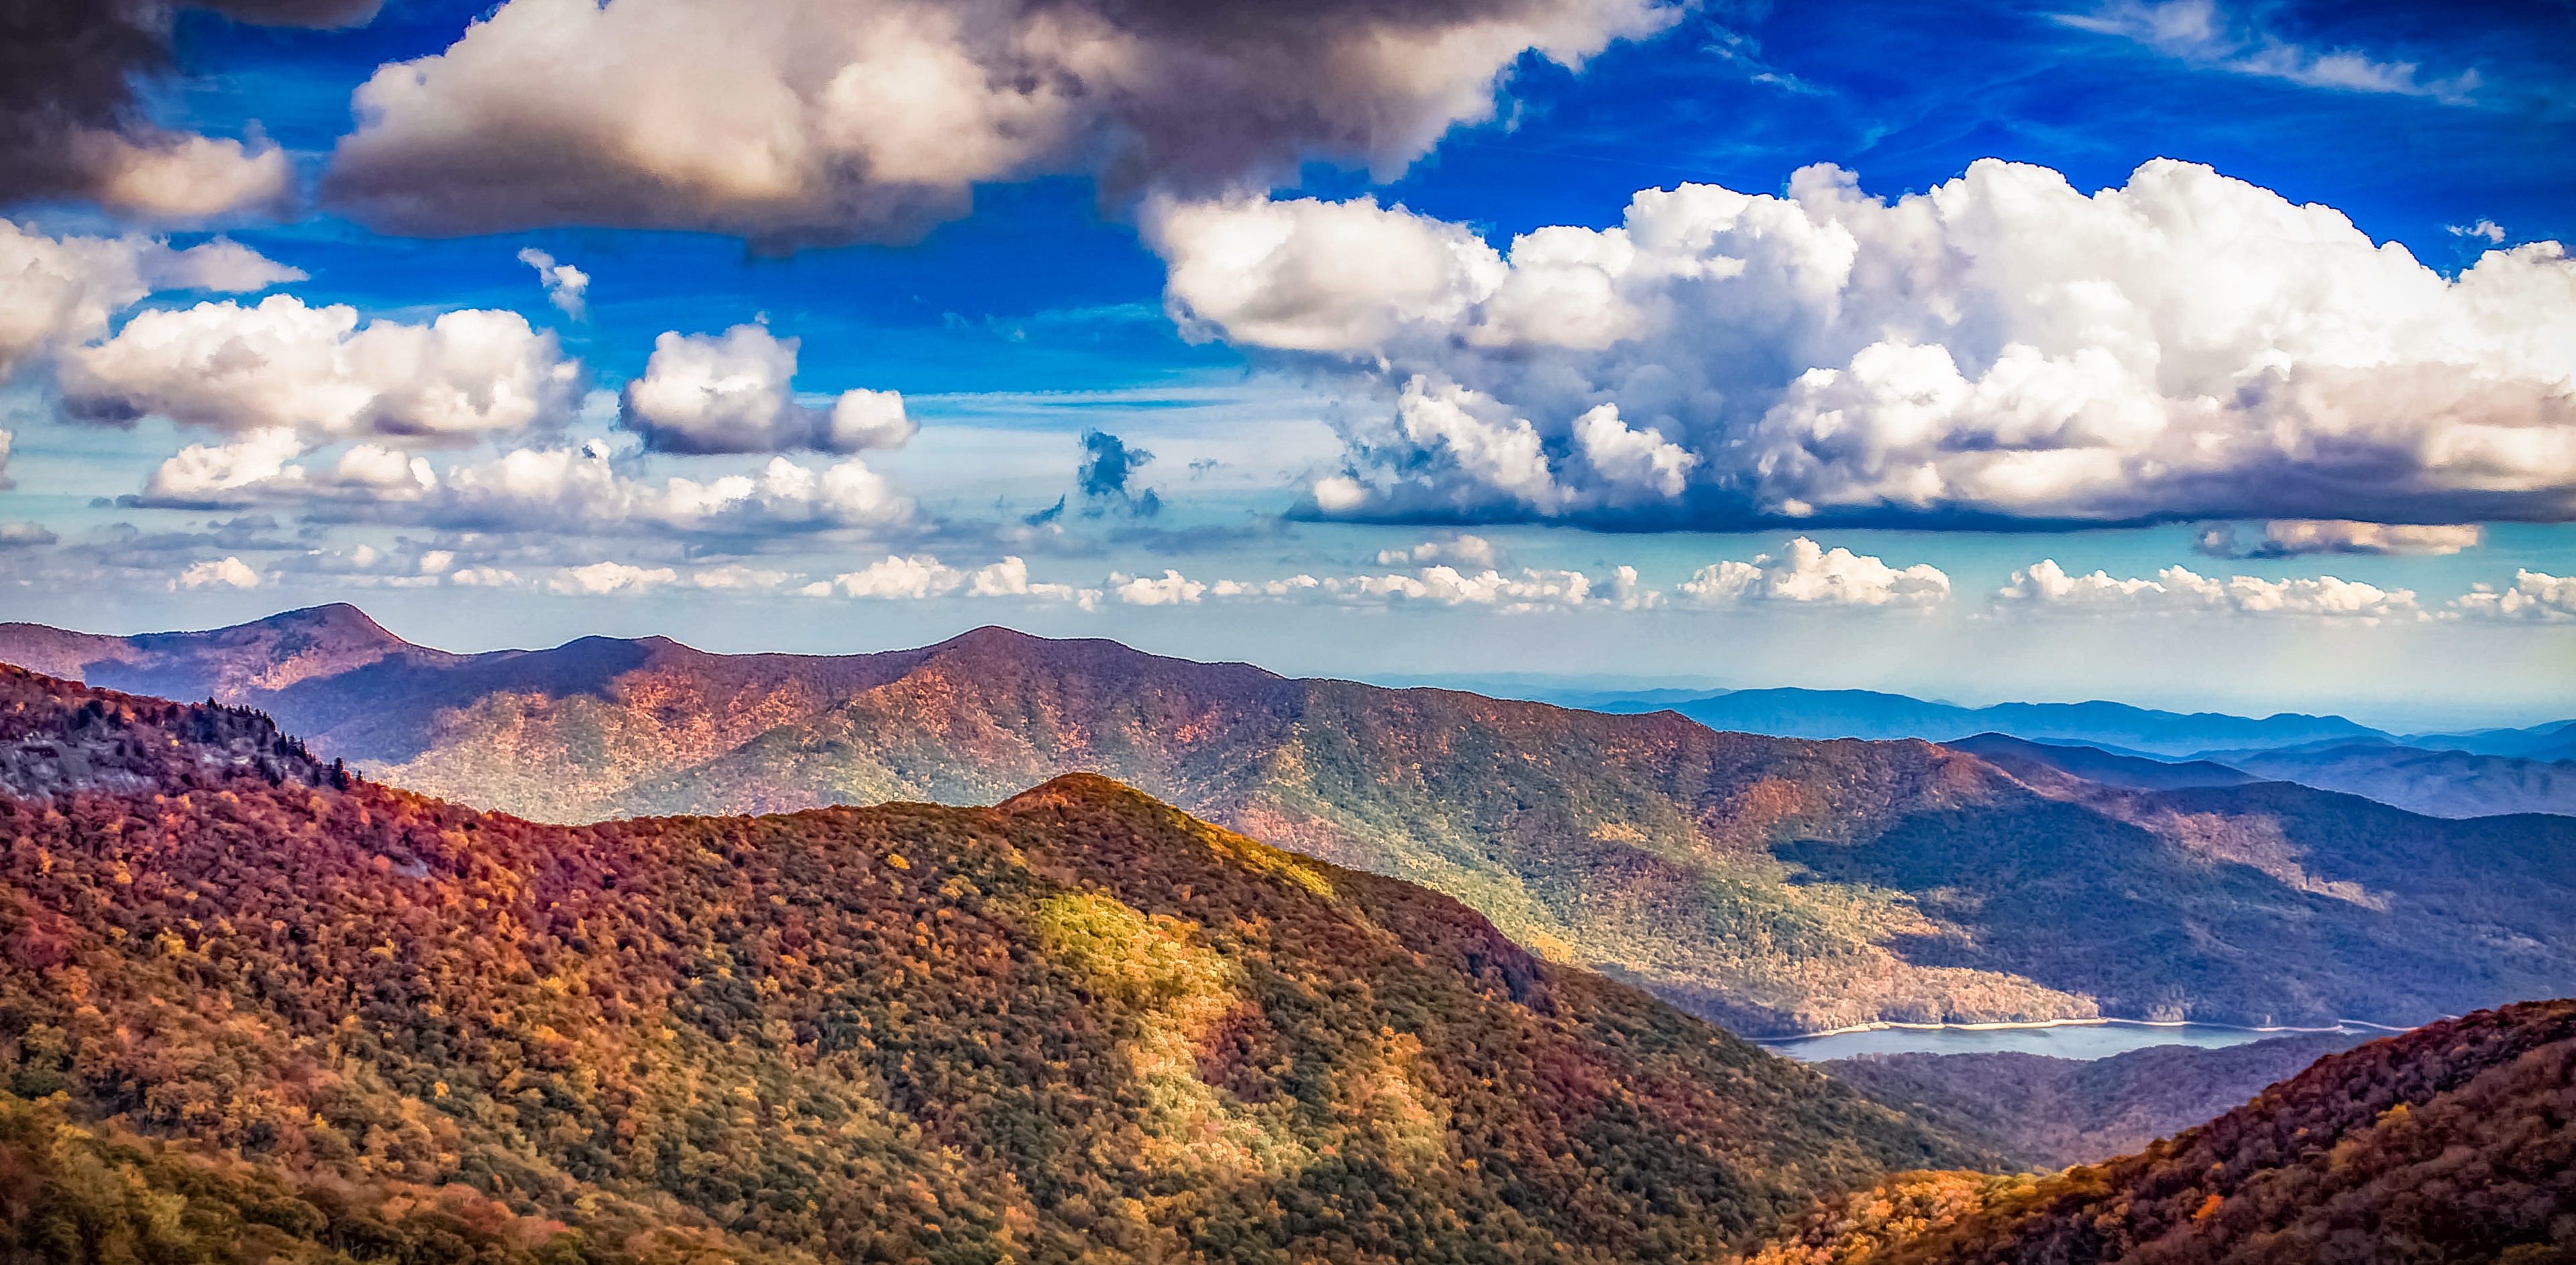 A Colorful Adventure to the East - The Blue Ridge Parkway – The Backpacker